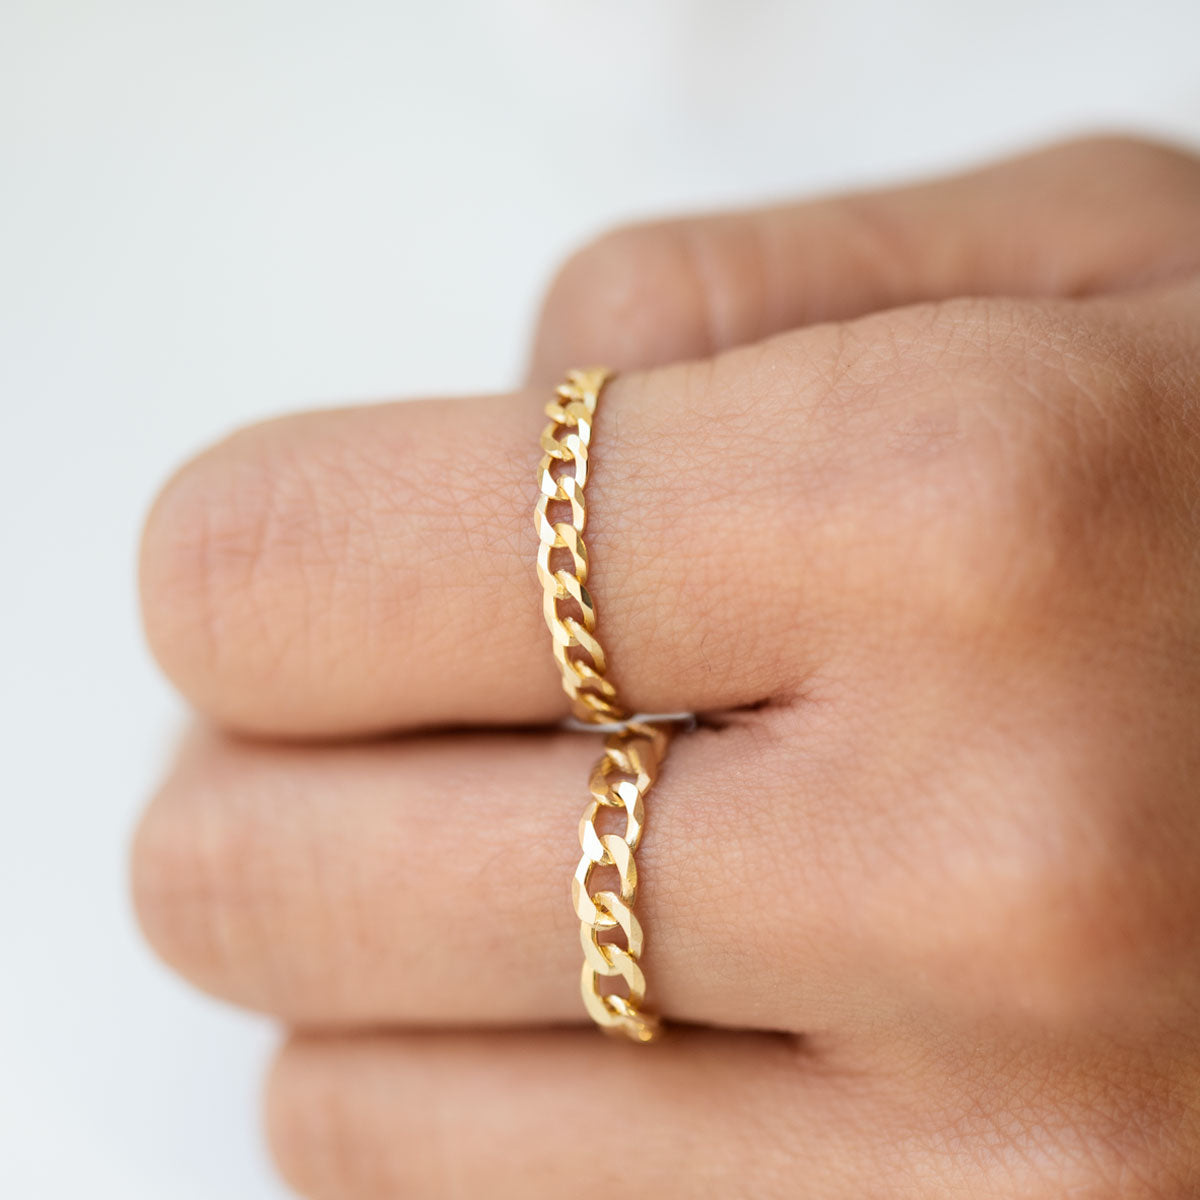 Chain Rings Gold, Gold Vermeil Rings, Dainty Ring, Delicate Ring 8 / 3mm / Gold Vermeil